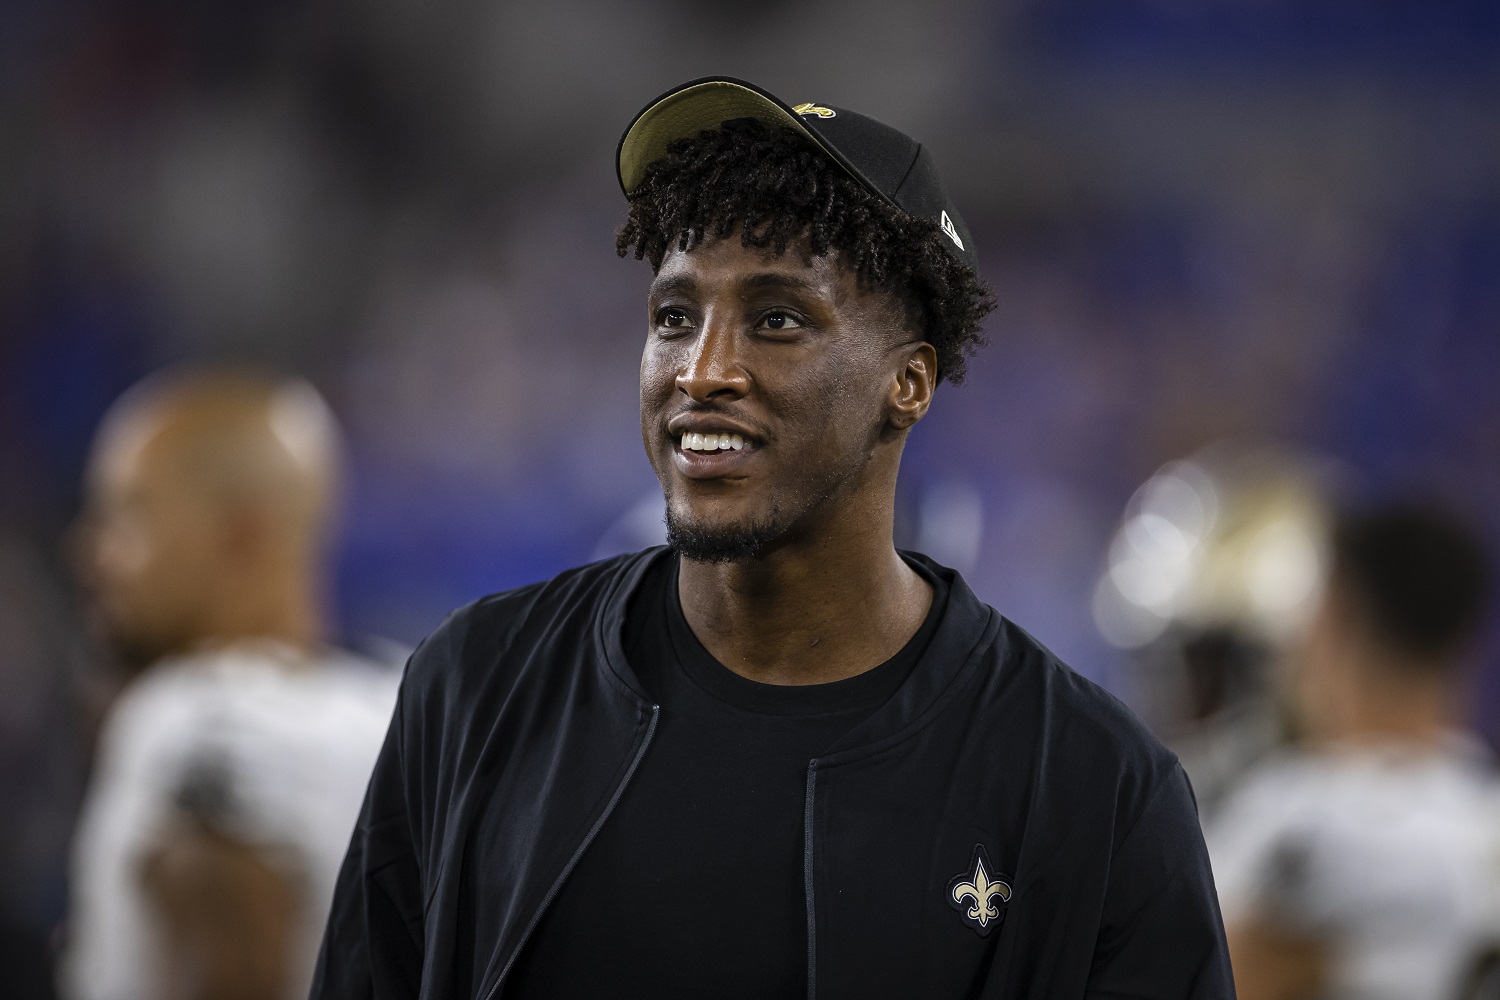 Michael Thomas of the New Orleans Saints looks on from the sidelines during the preseason game against the Baltimore Ravens at M&T Bank Stadium on Aug. 14, 2021.